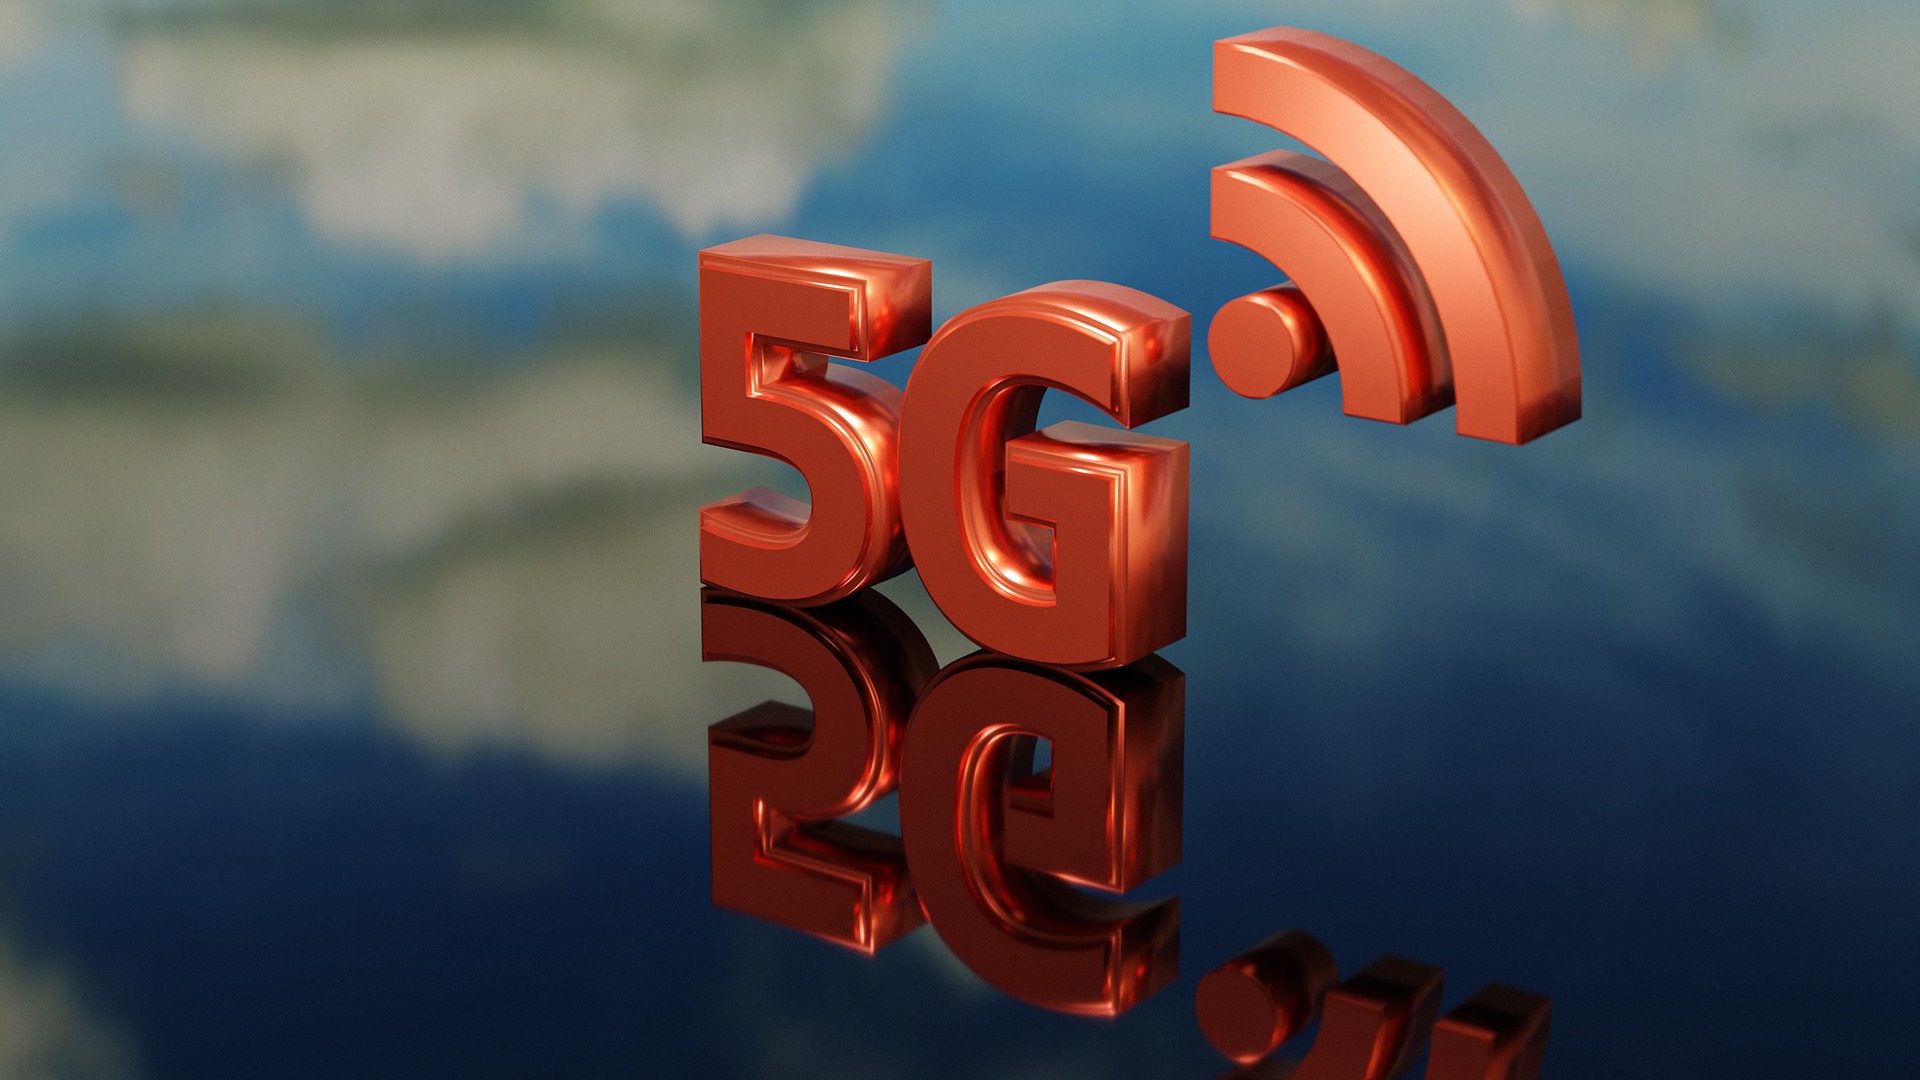 IoT and 5g